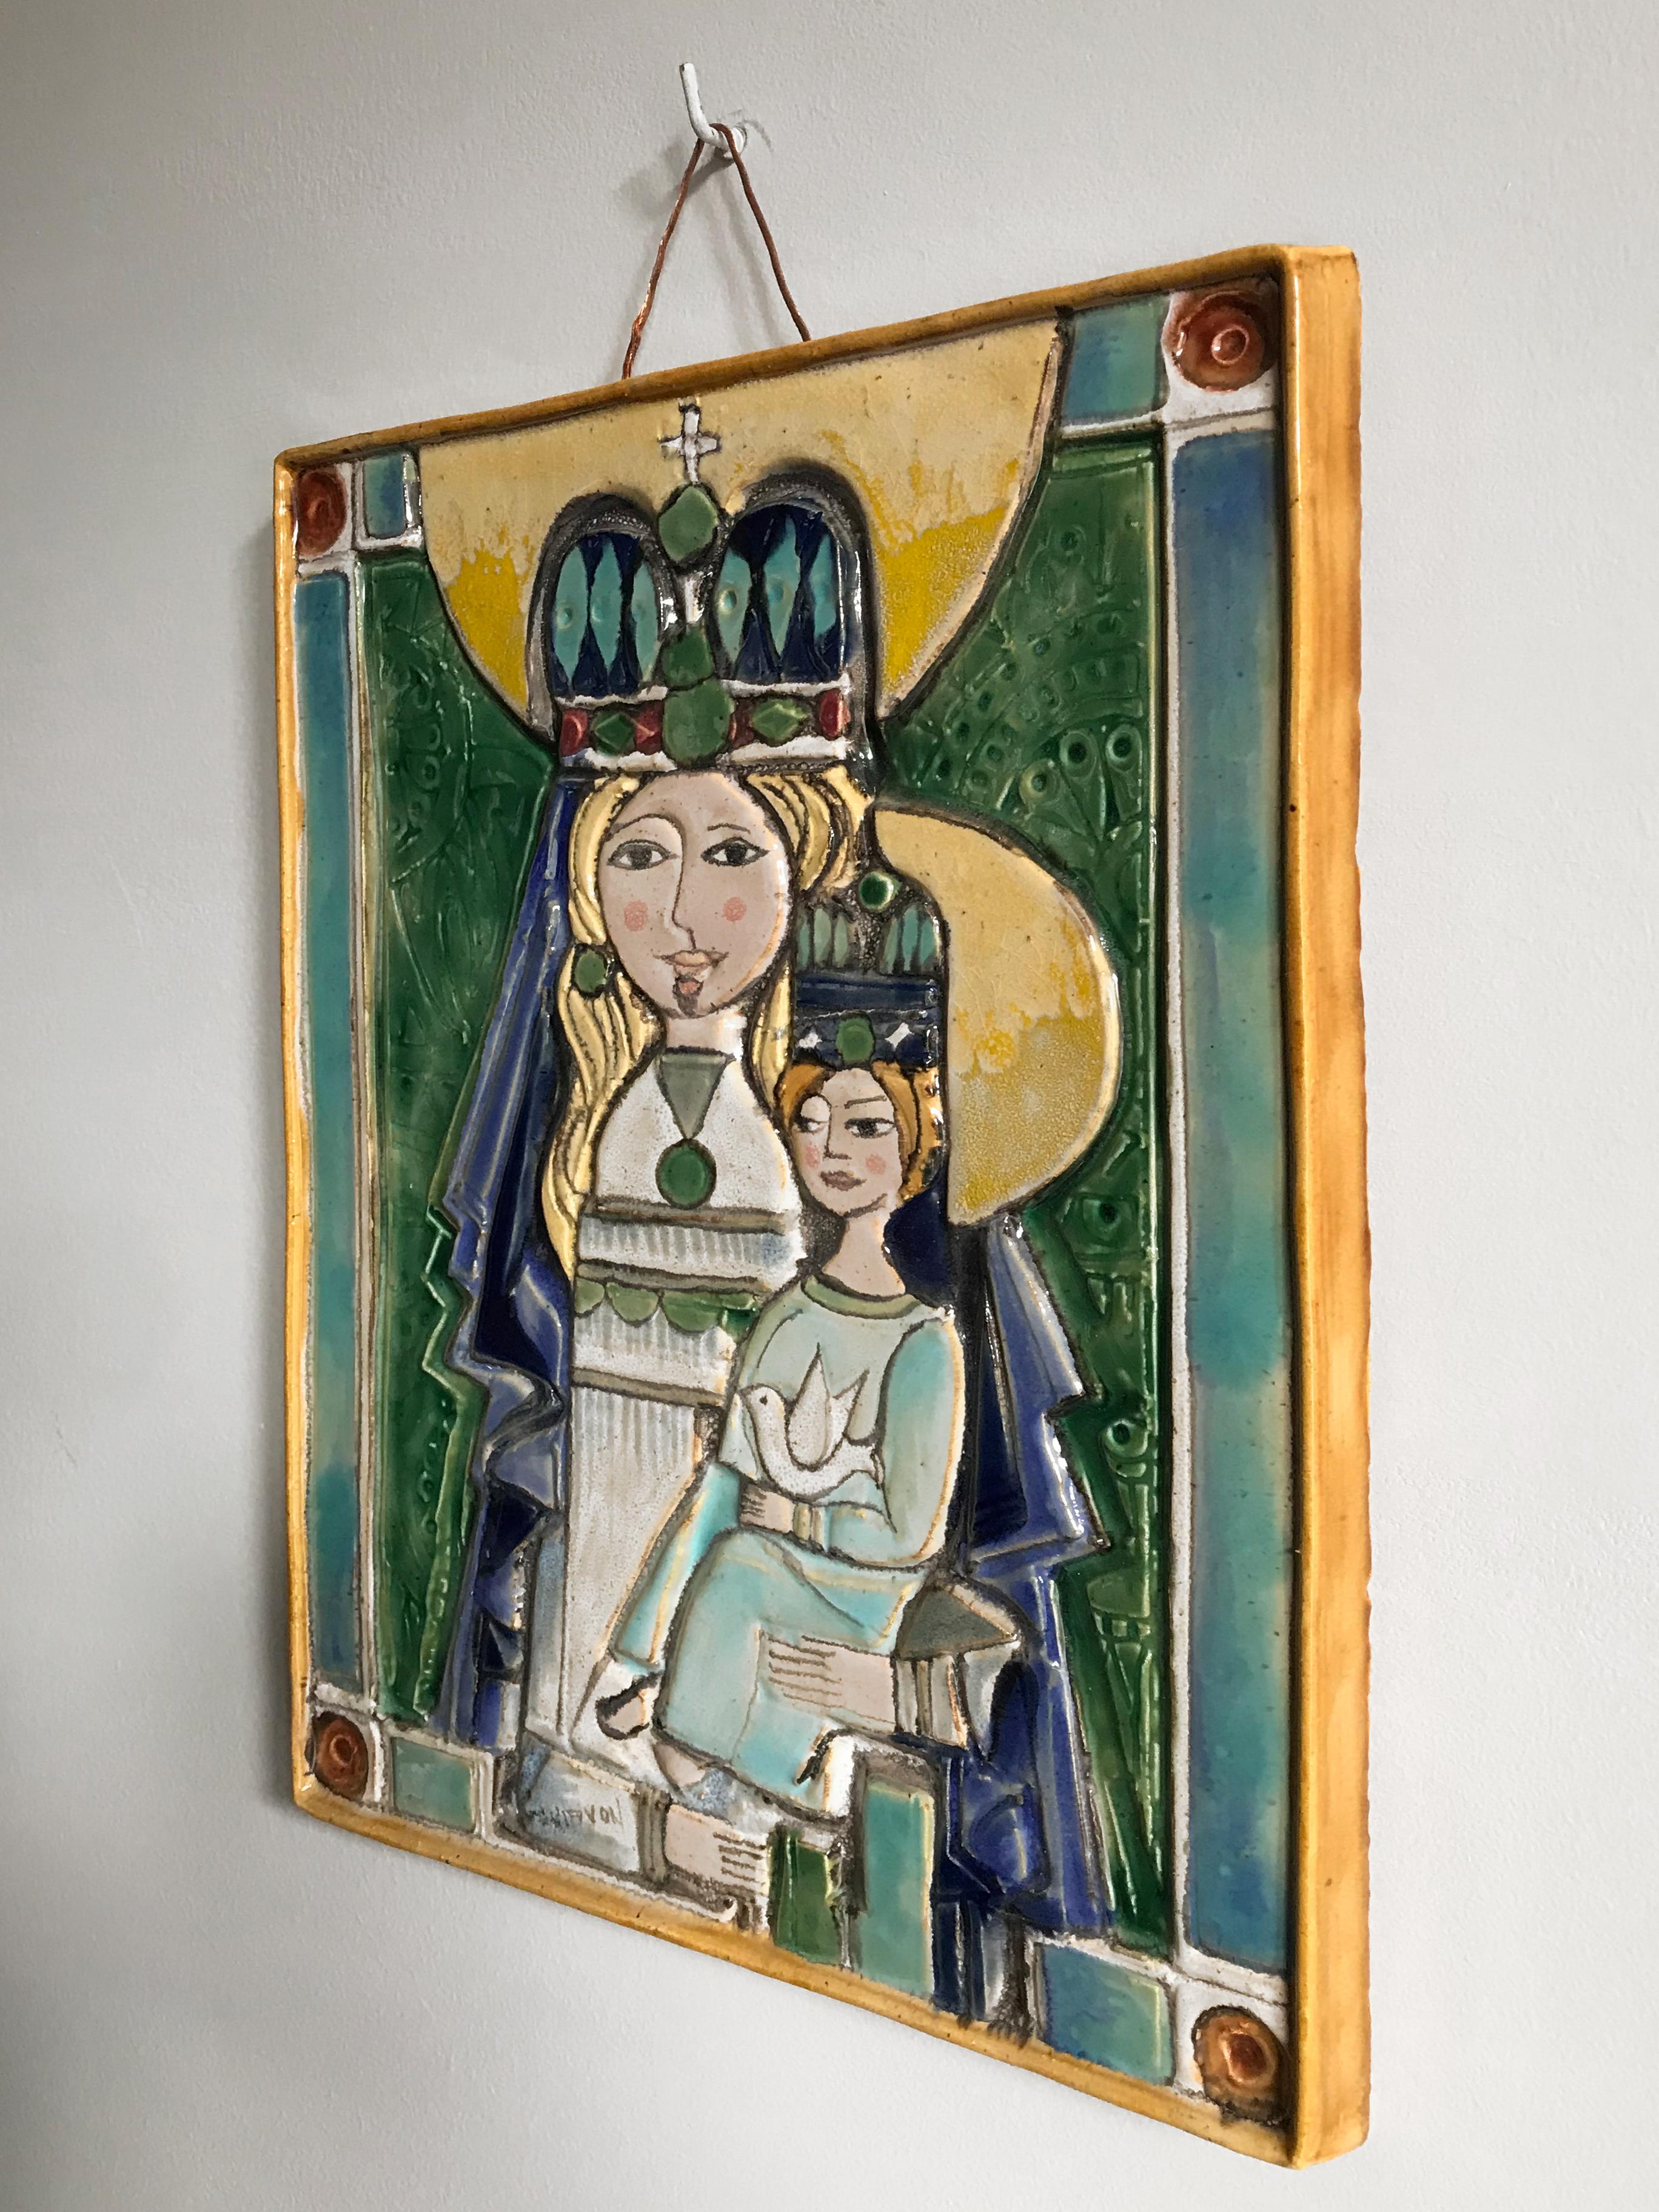 Italian polychrome glazed ceramic panel decorated in bas-relief depicting Madonna and Child, by Elio Schiavon, signed at the base, Padova, 1950s.

Please note that the item is original of the period and this shows normal signs of age and use.